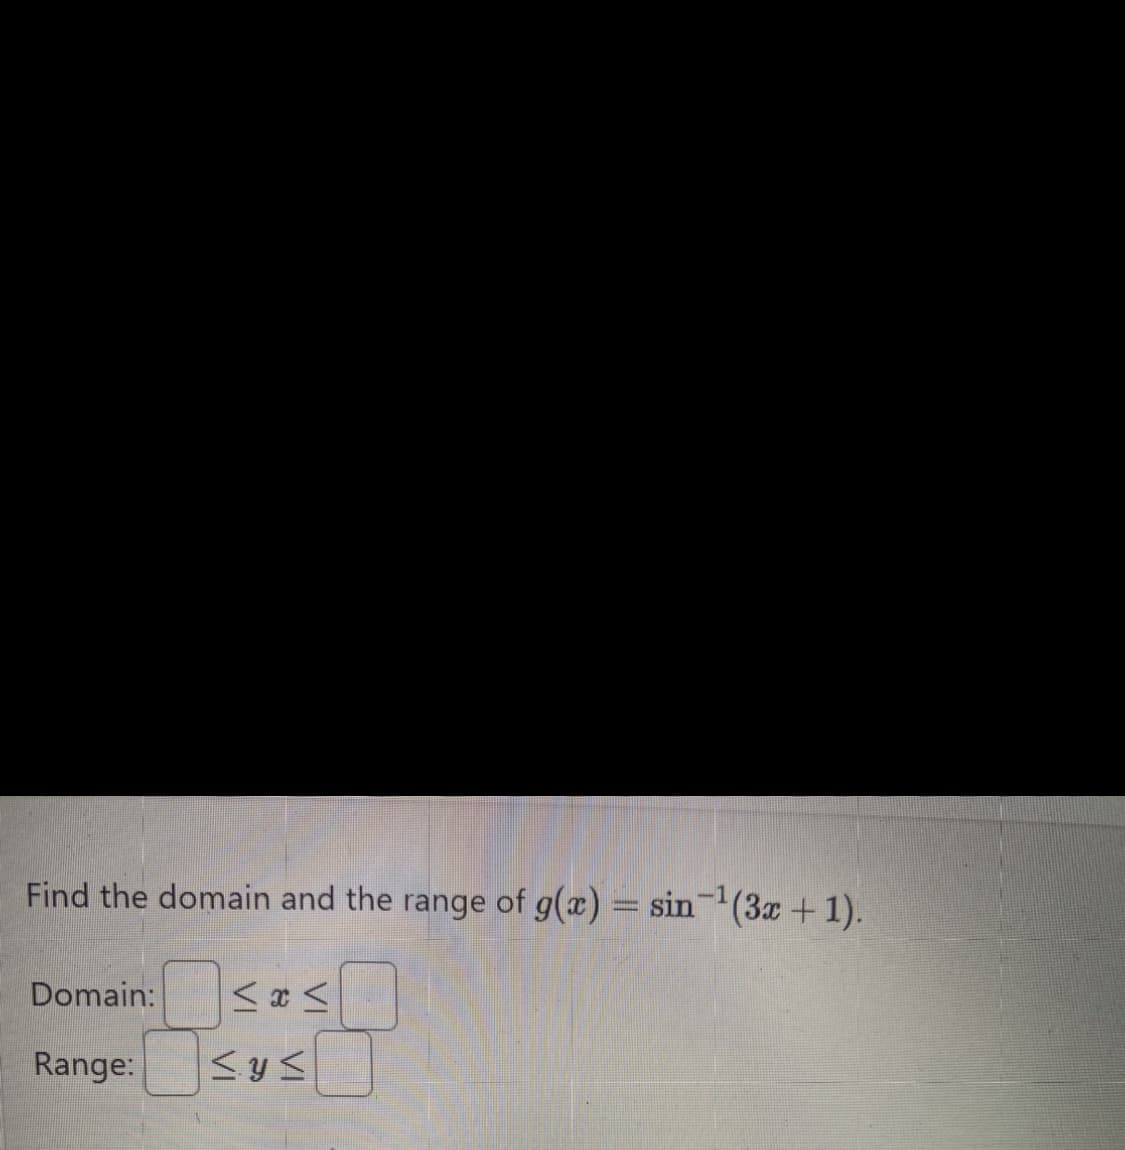 Find the domain and the range of g(x) = sin ¹(3x + 1).
Domain:
Range:
≤x≤
<.y≤